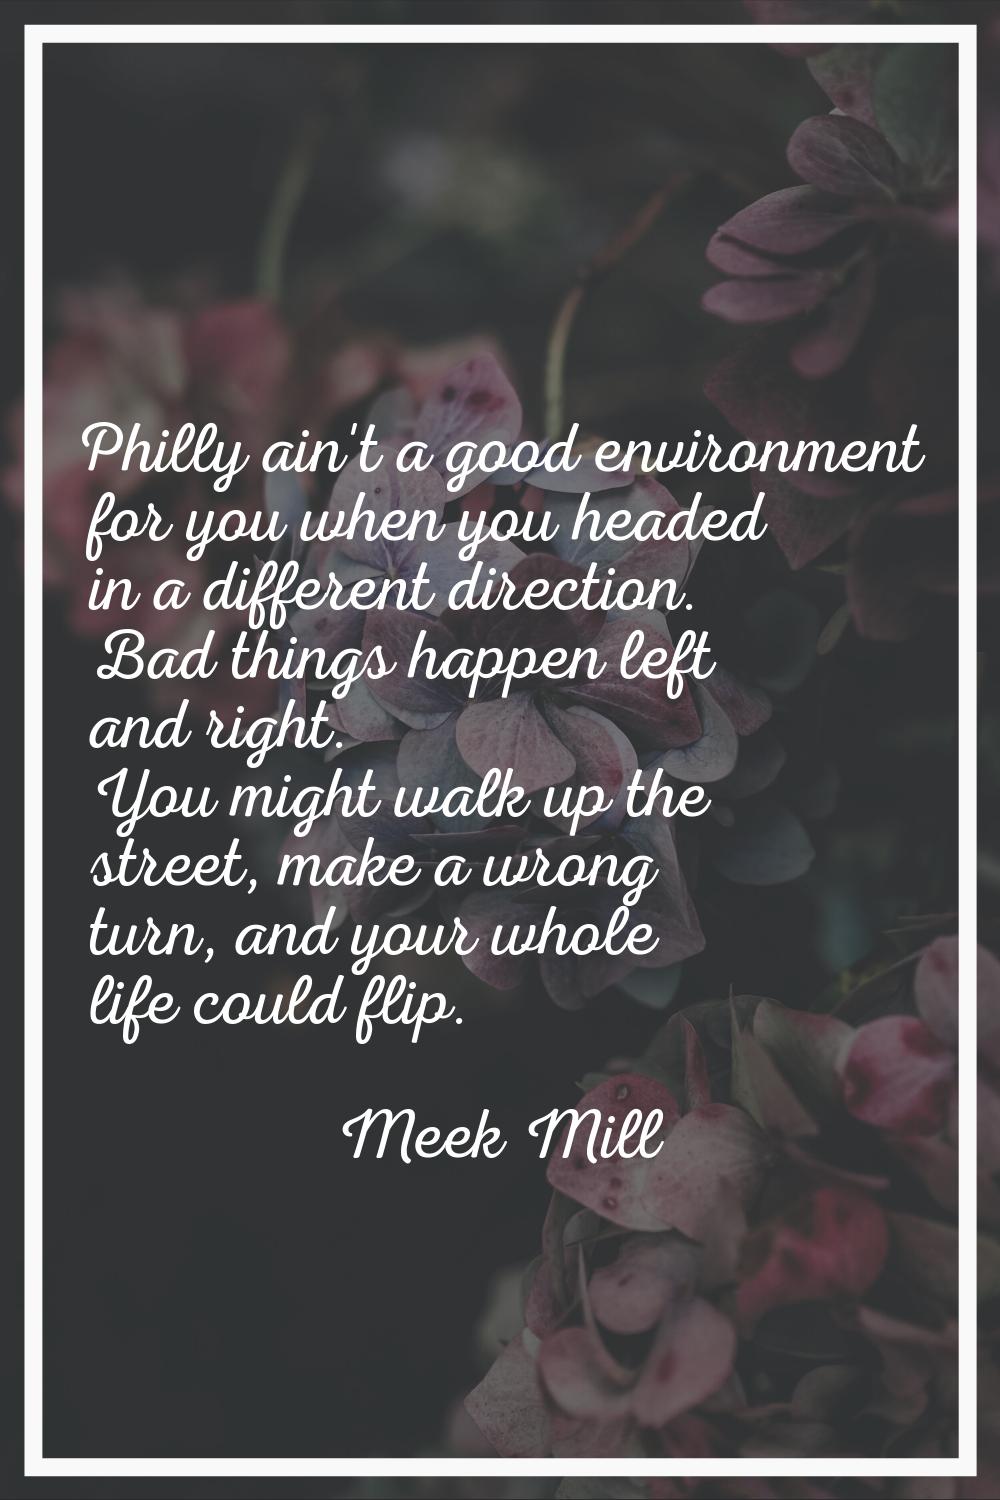 Philly ain't a good environment for you when you headed in a different direction. Bad things happen